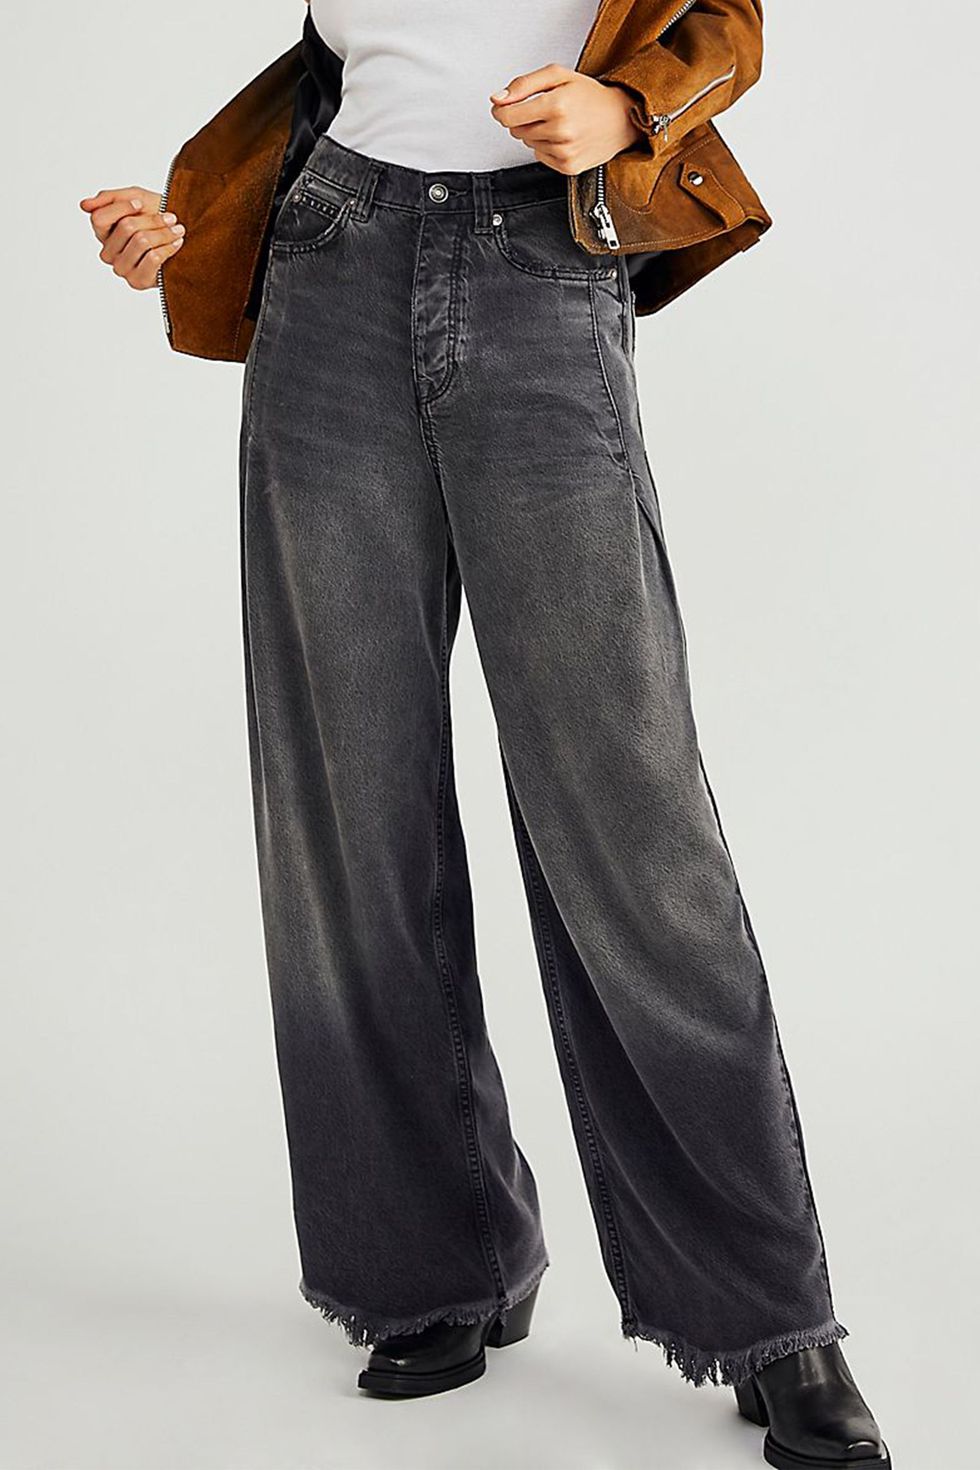 West Slouchy Jeans